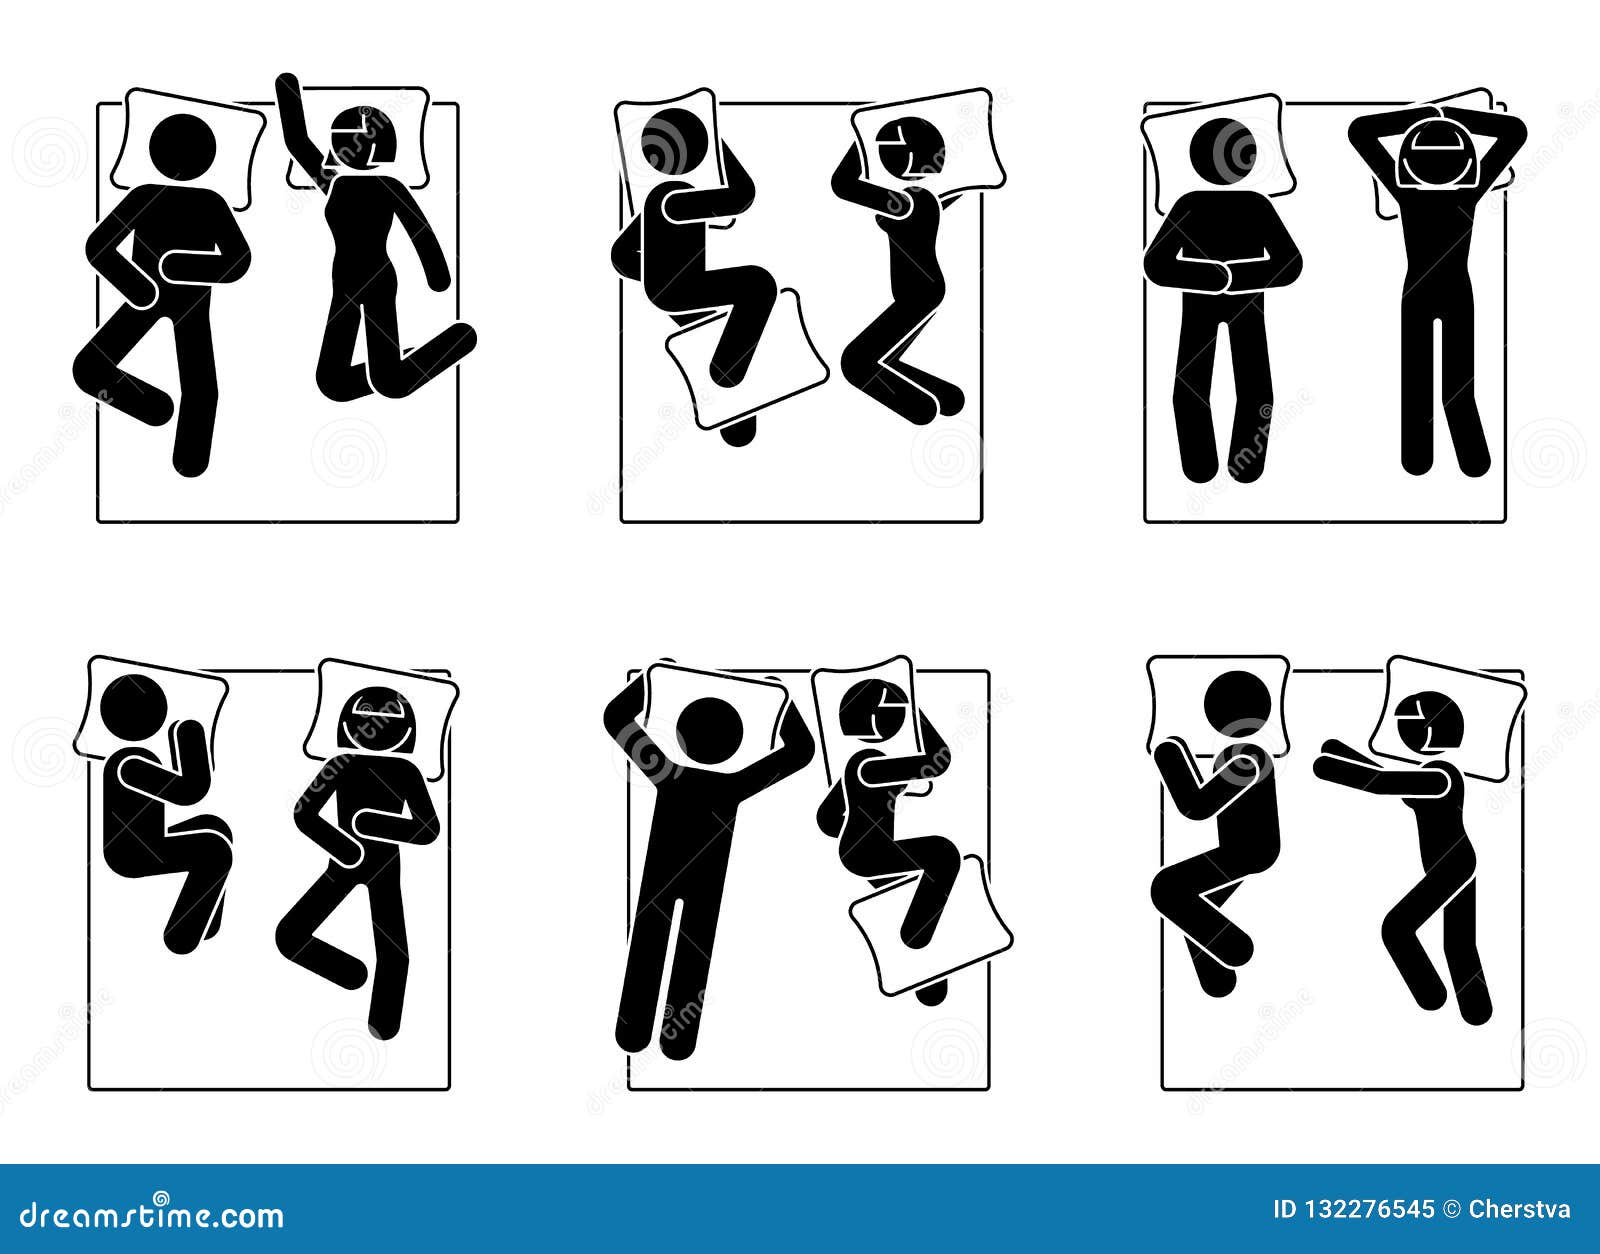 Illustration about Stick figure different sleeping positions set. 